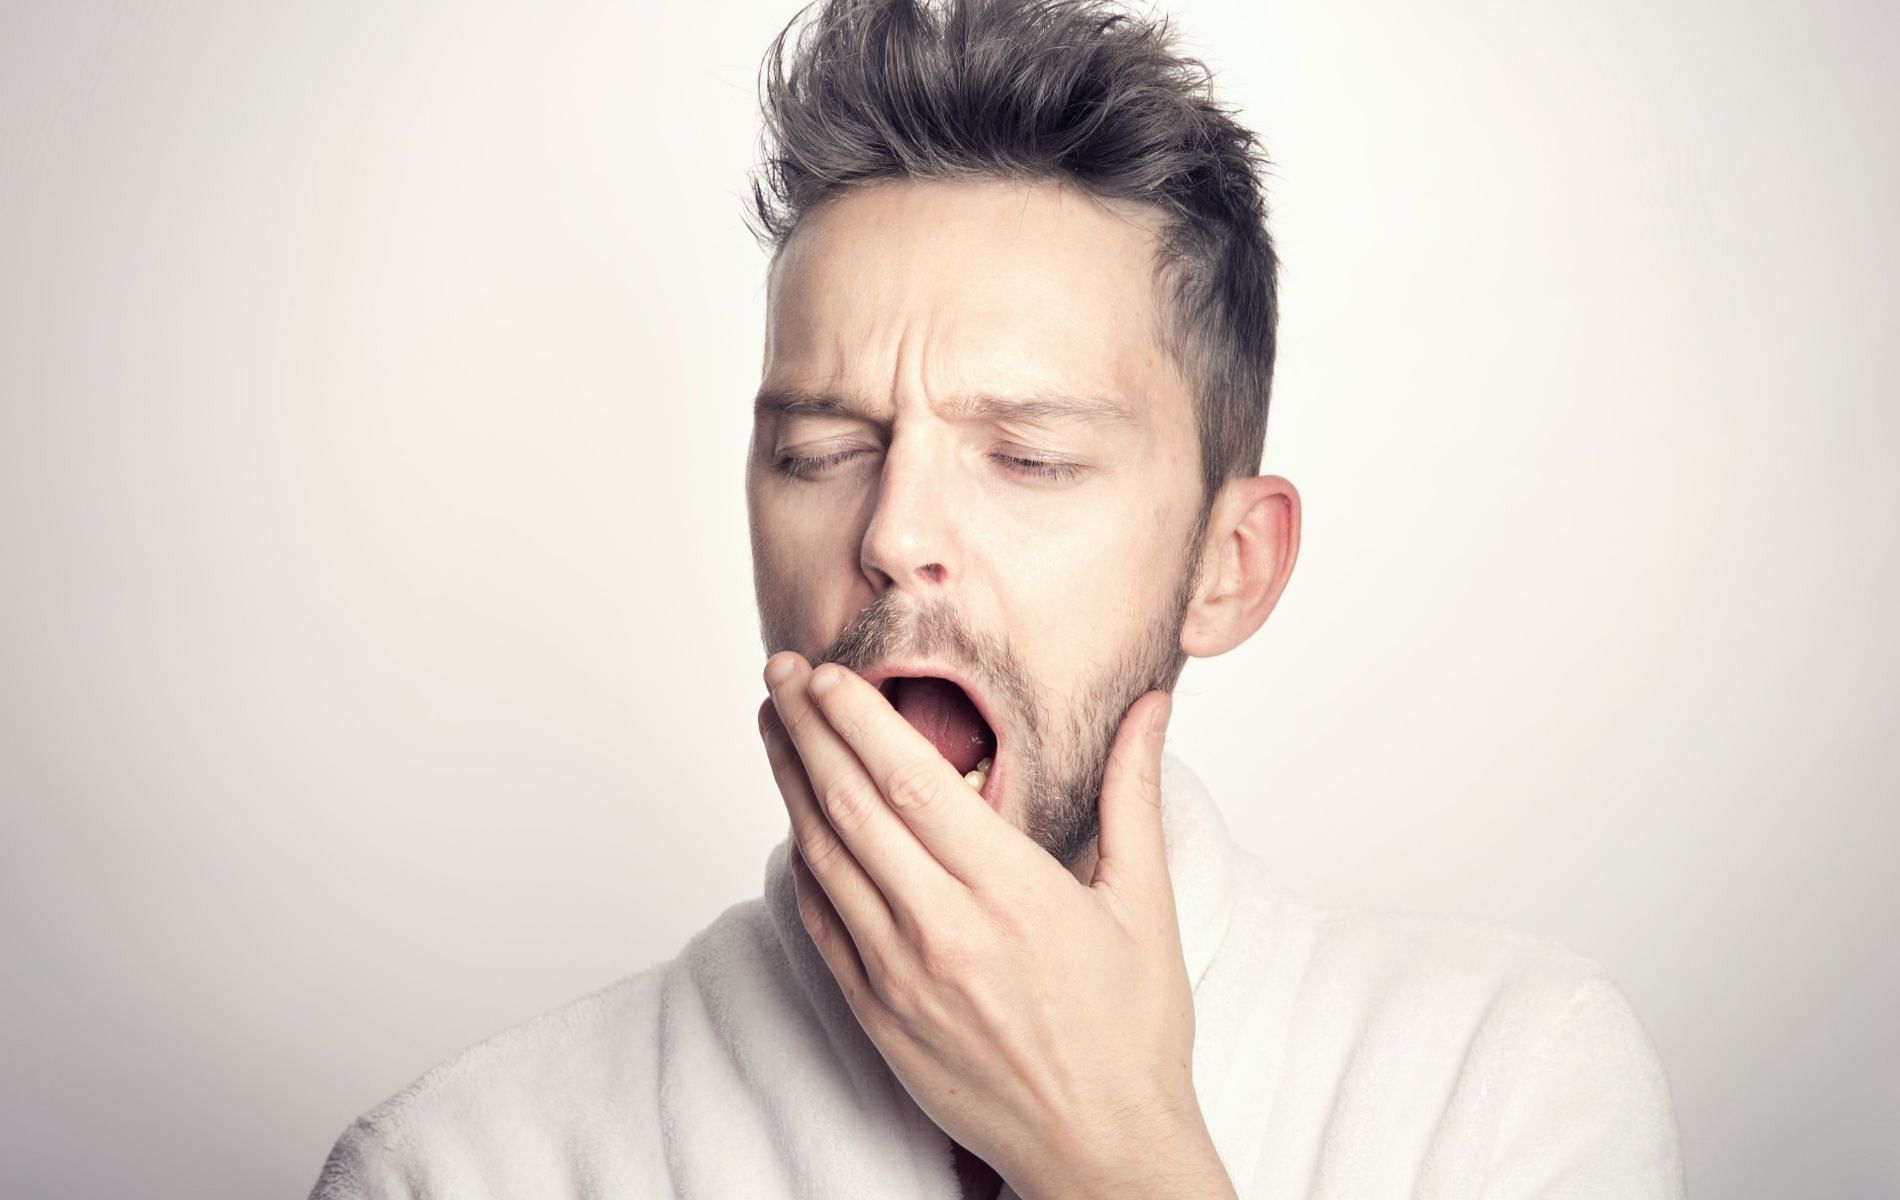 Yawning or oscitation occurs to make our system more alert. (Image via Pexels)